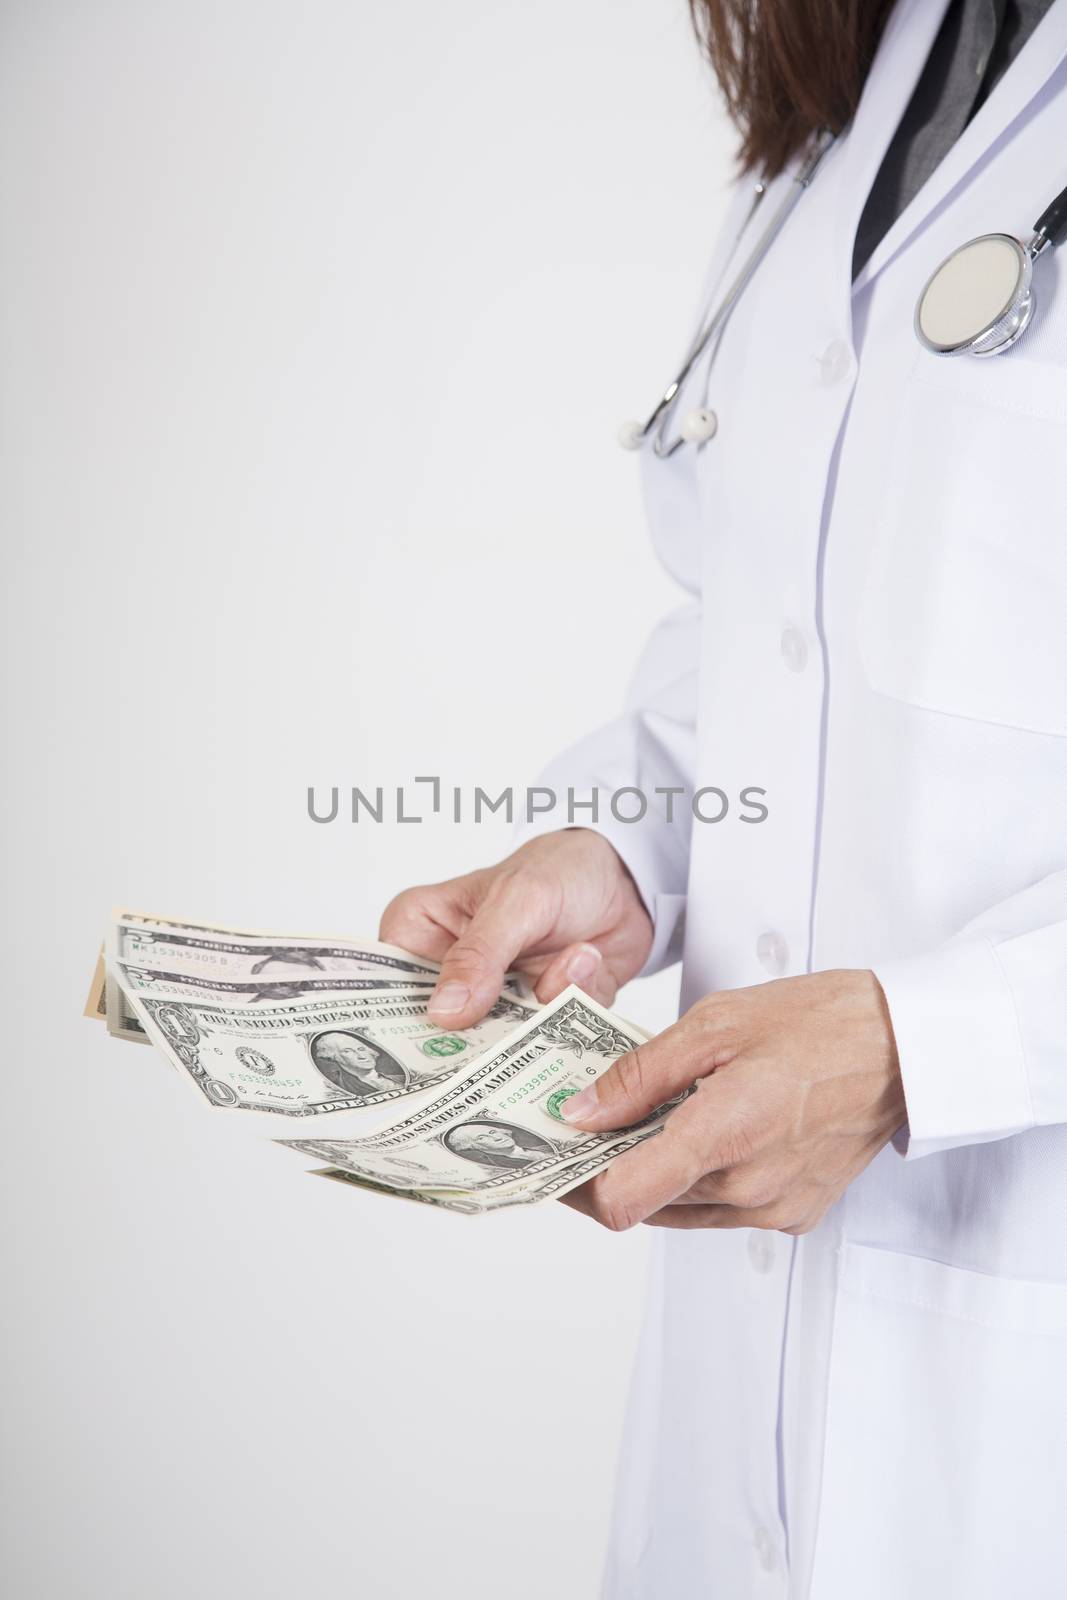 woman doctor hands with white gown and stethoscope counting wad of dollar banknotes isolated over white background